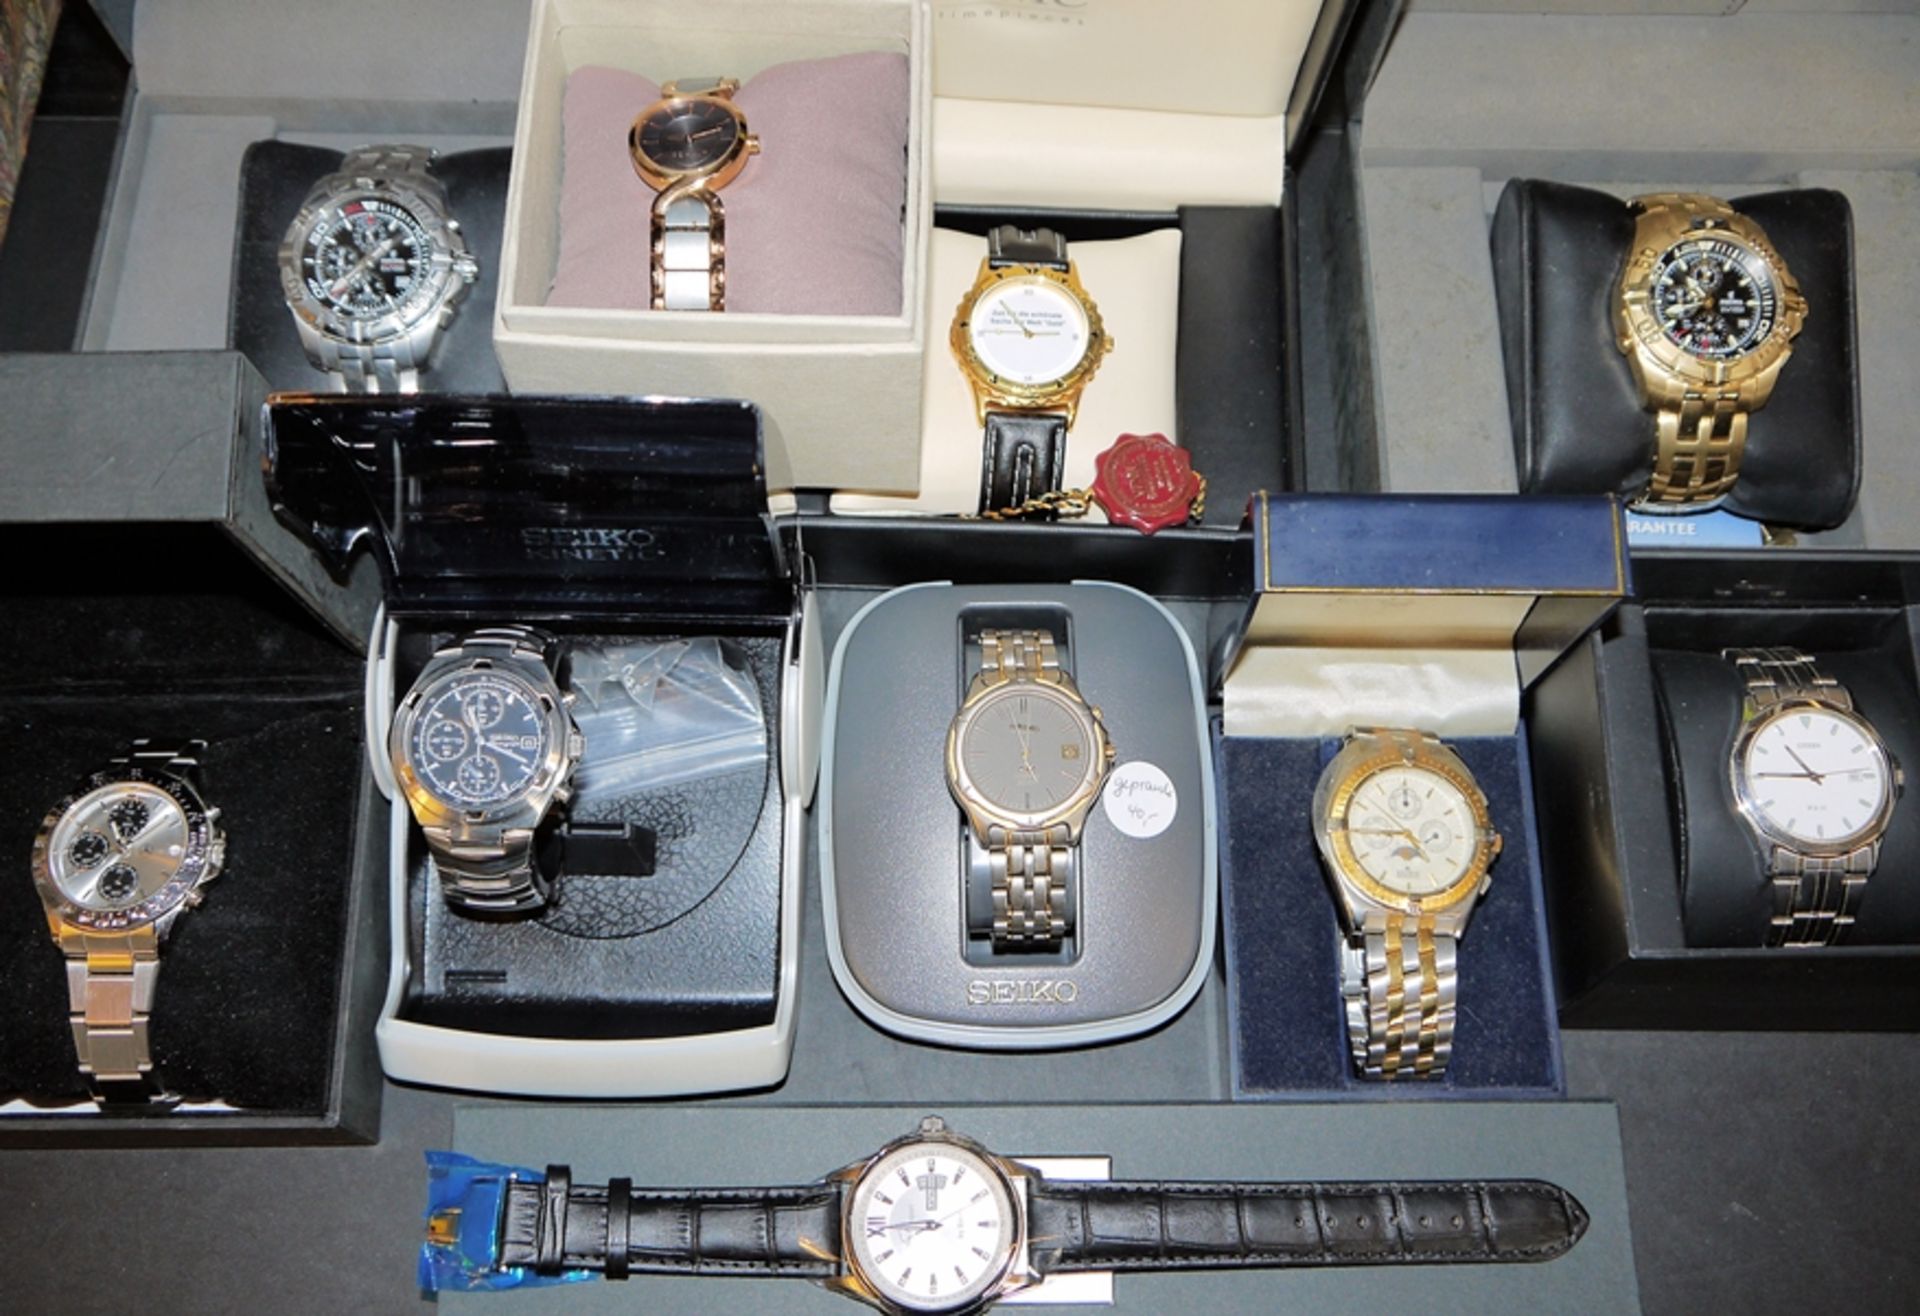 11 high-quality wristwatches in caskets